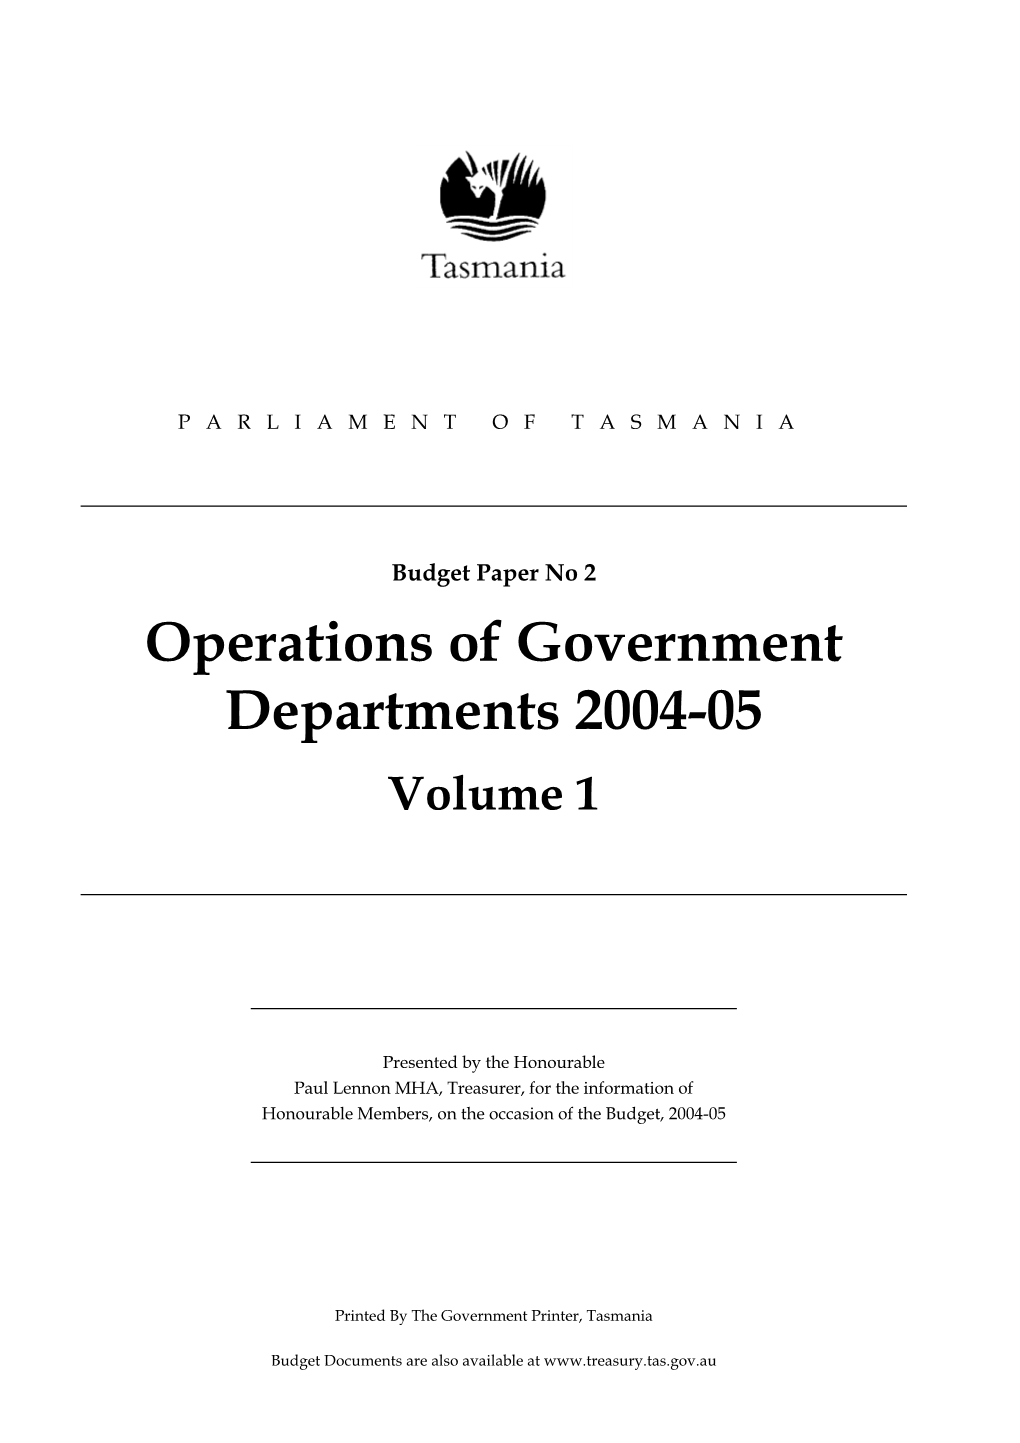 Operations of Government Departments 2004-05 Volume 1